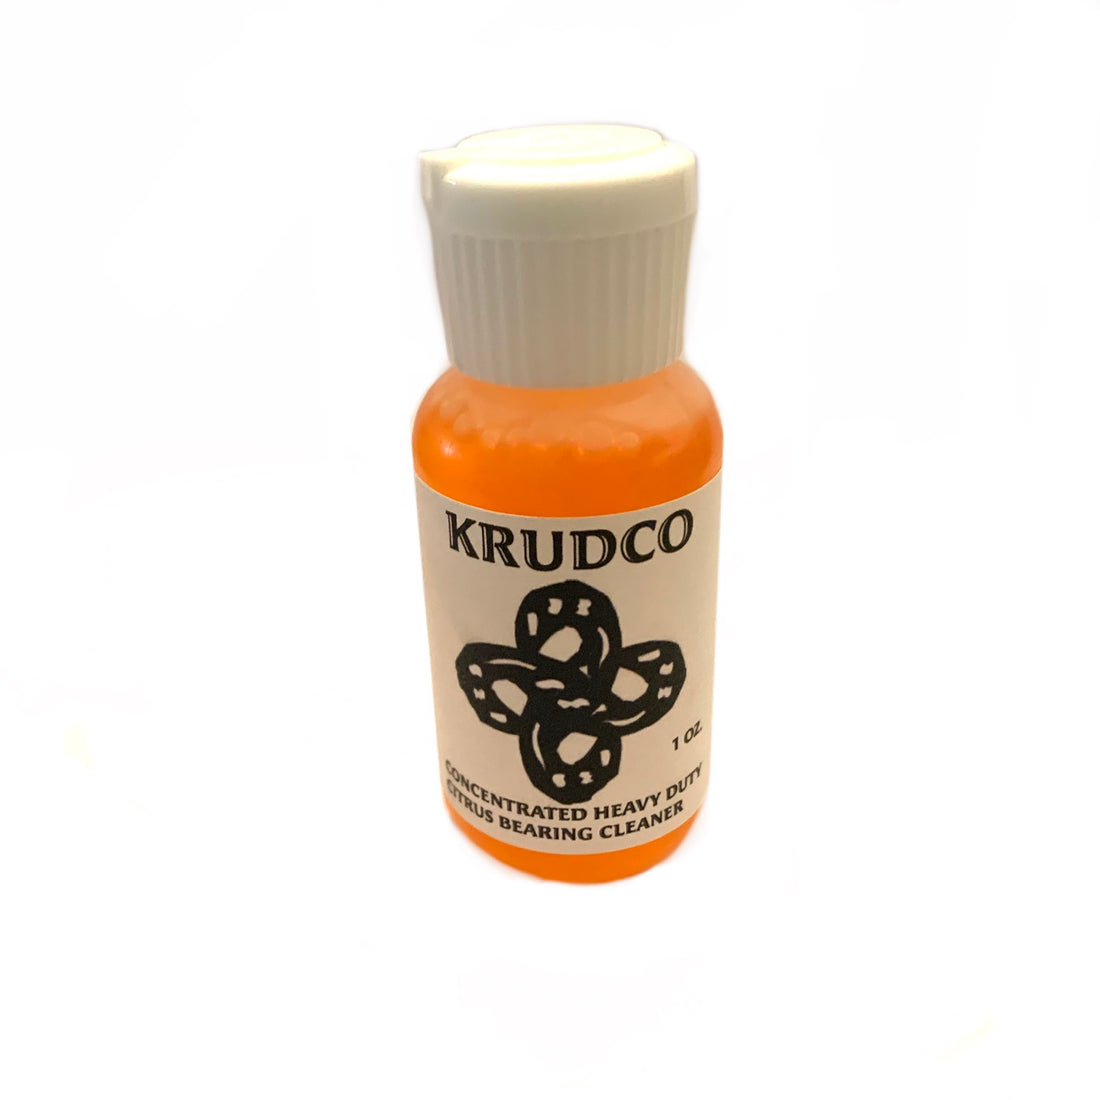 Krudco Concentrated Citrus Bearing Cleaner 1 oz.